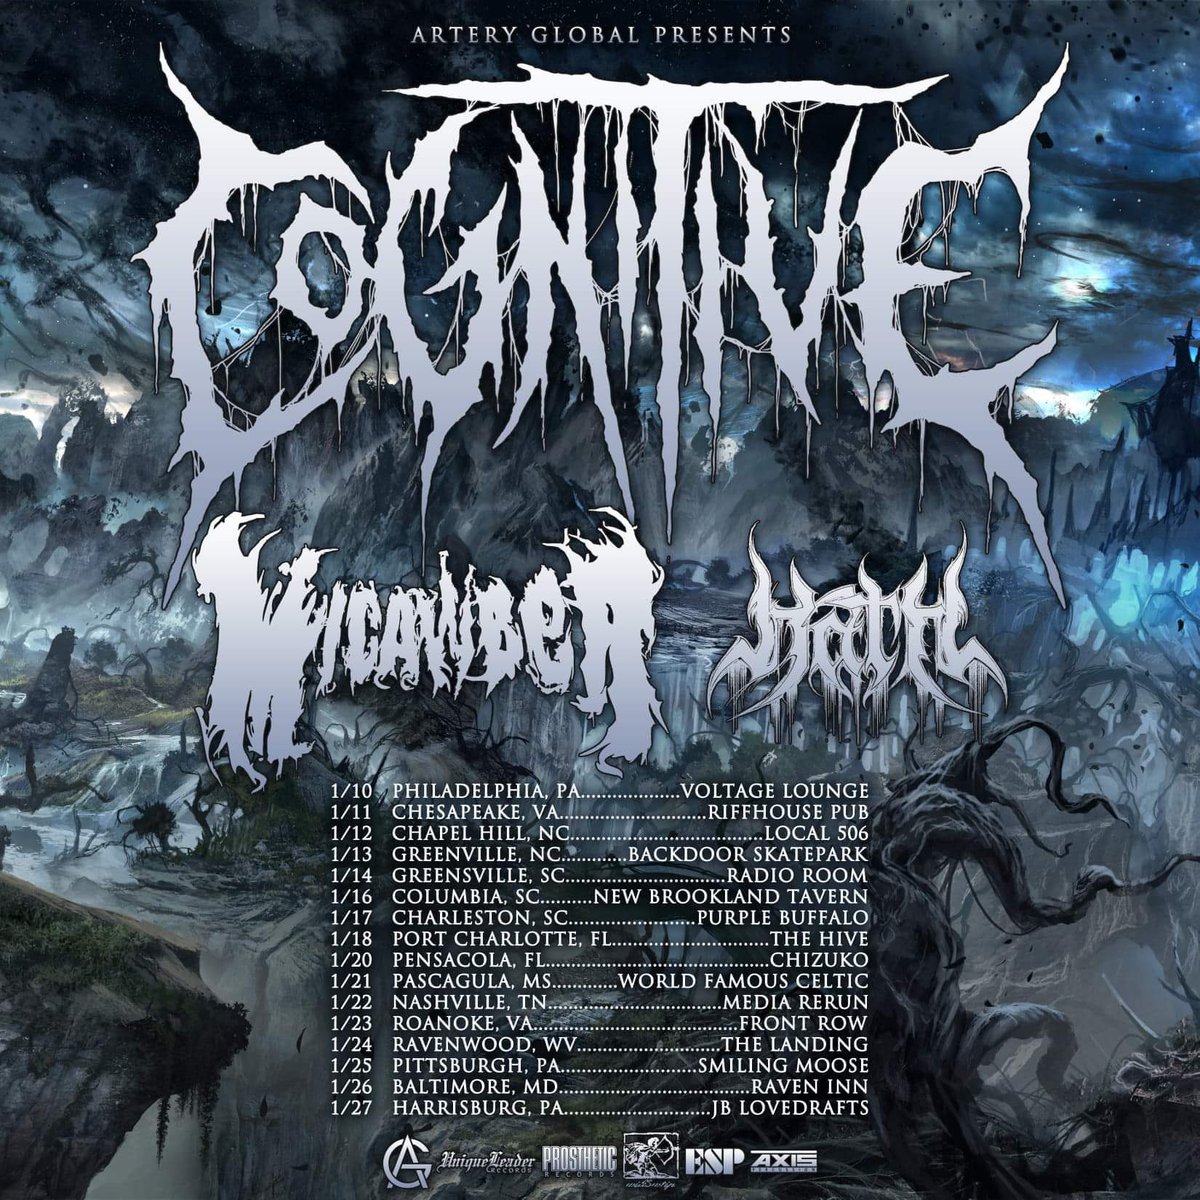 Tour is fast approaching!  See you on the road next month! #heavymetal #deathmetal #eastcoast #metaltour